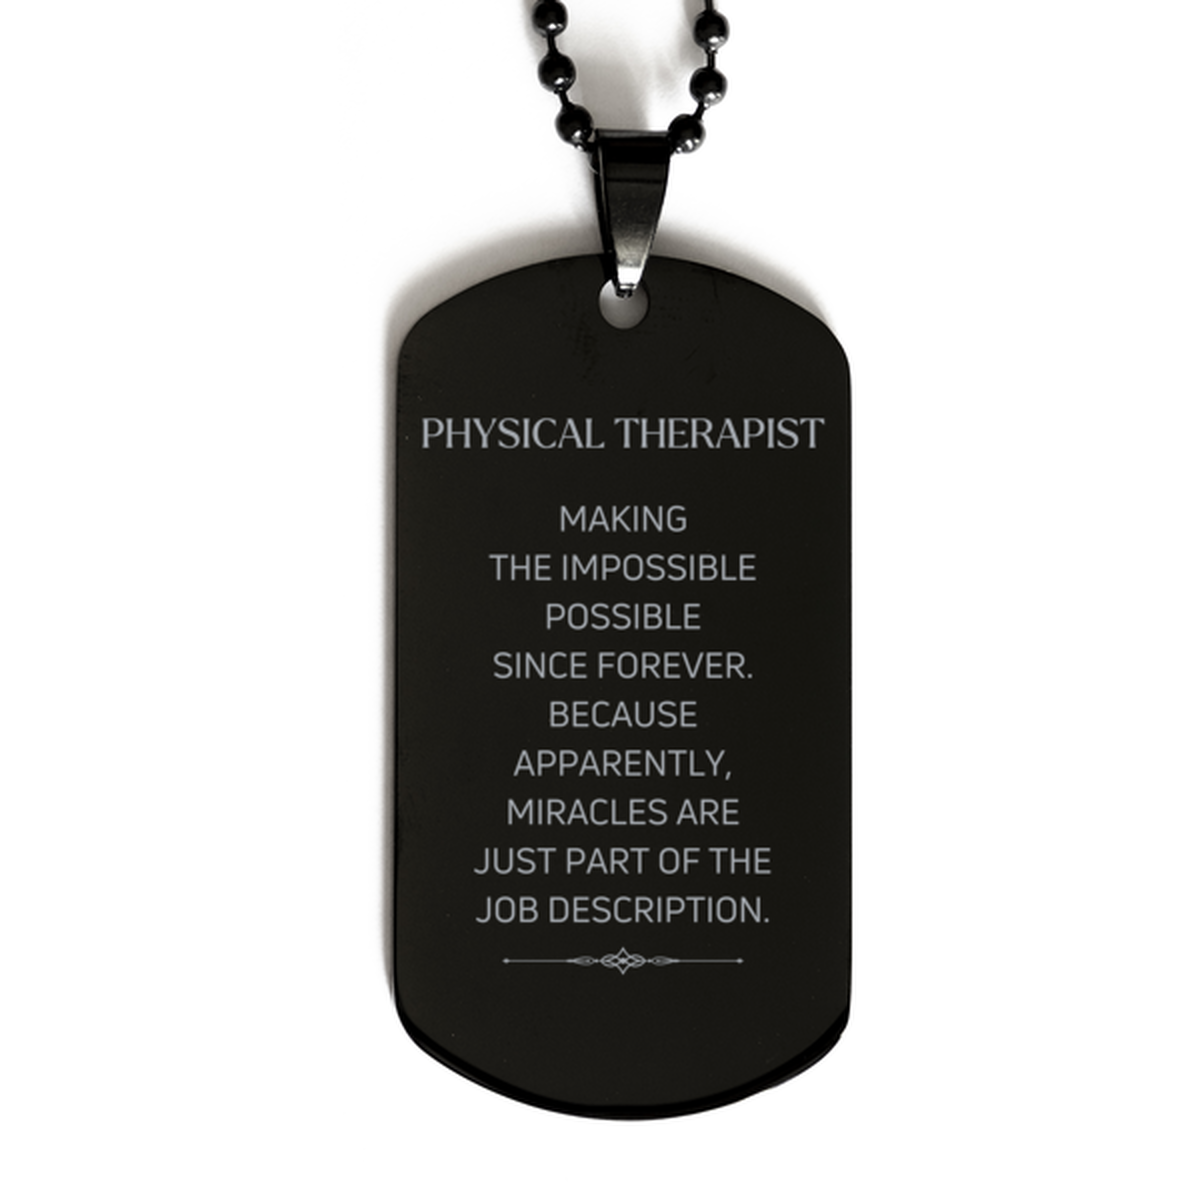 Funny Physical Therapist Gifts, Miracles are just part of the job description, Inspirational Birthday Black Dog Tag For Physical Therapist, Men, Women, Coworkers, Friends, Boss